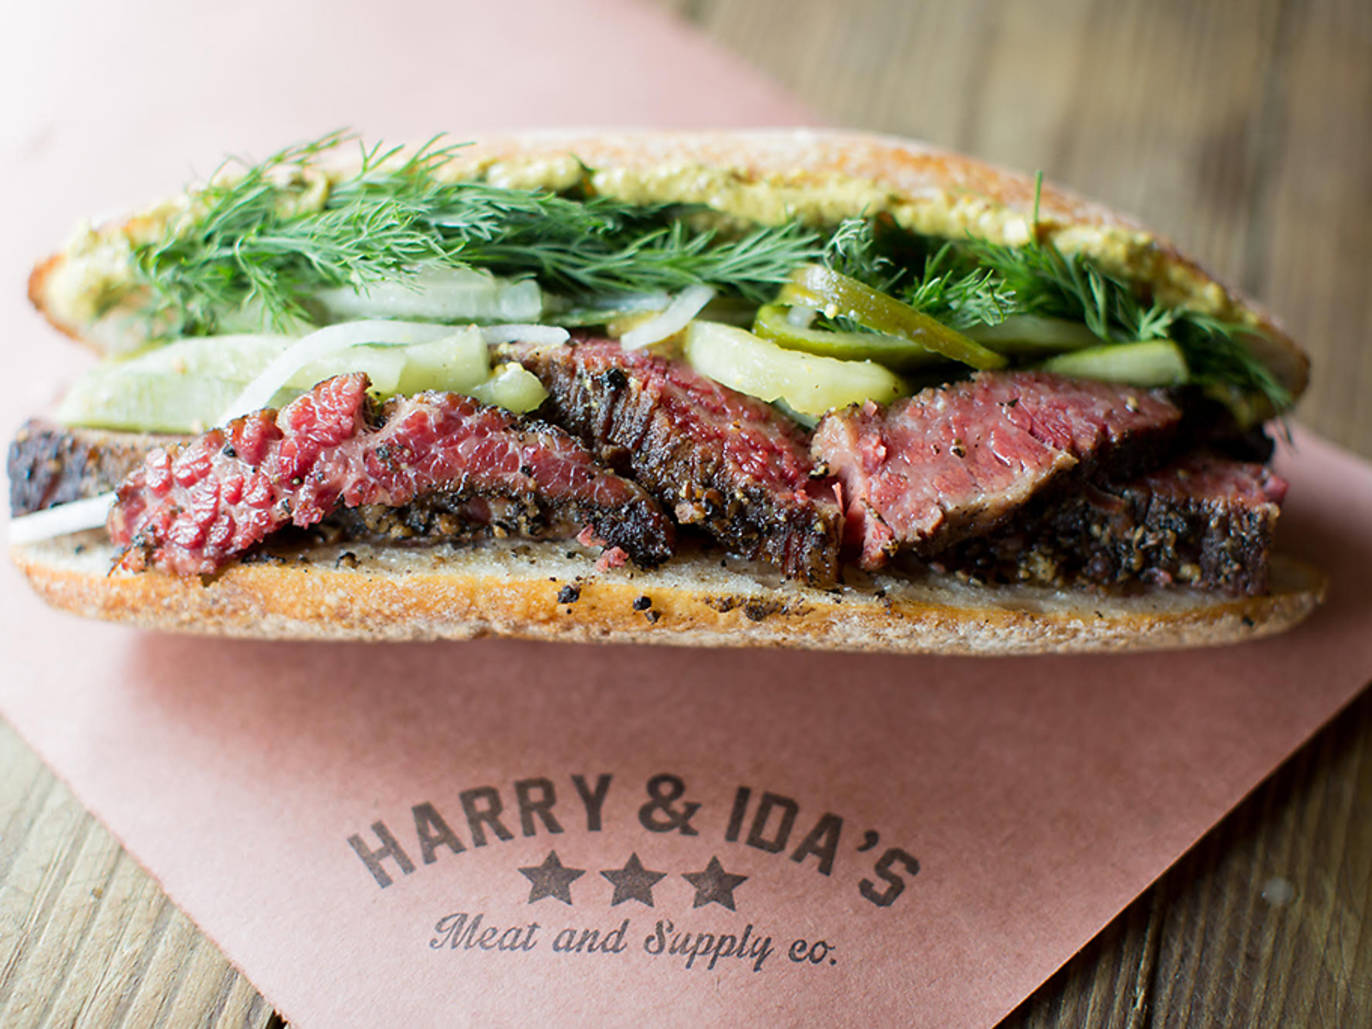 Where to Find the Best Pastrami Sandwiches in NYC